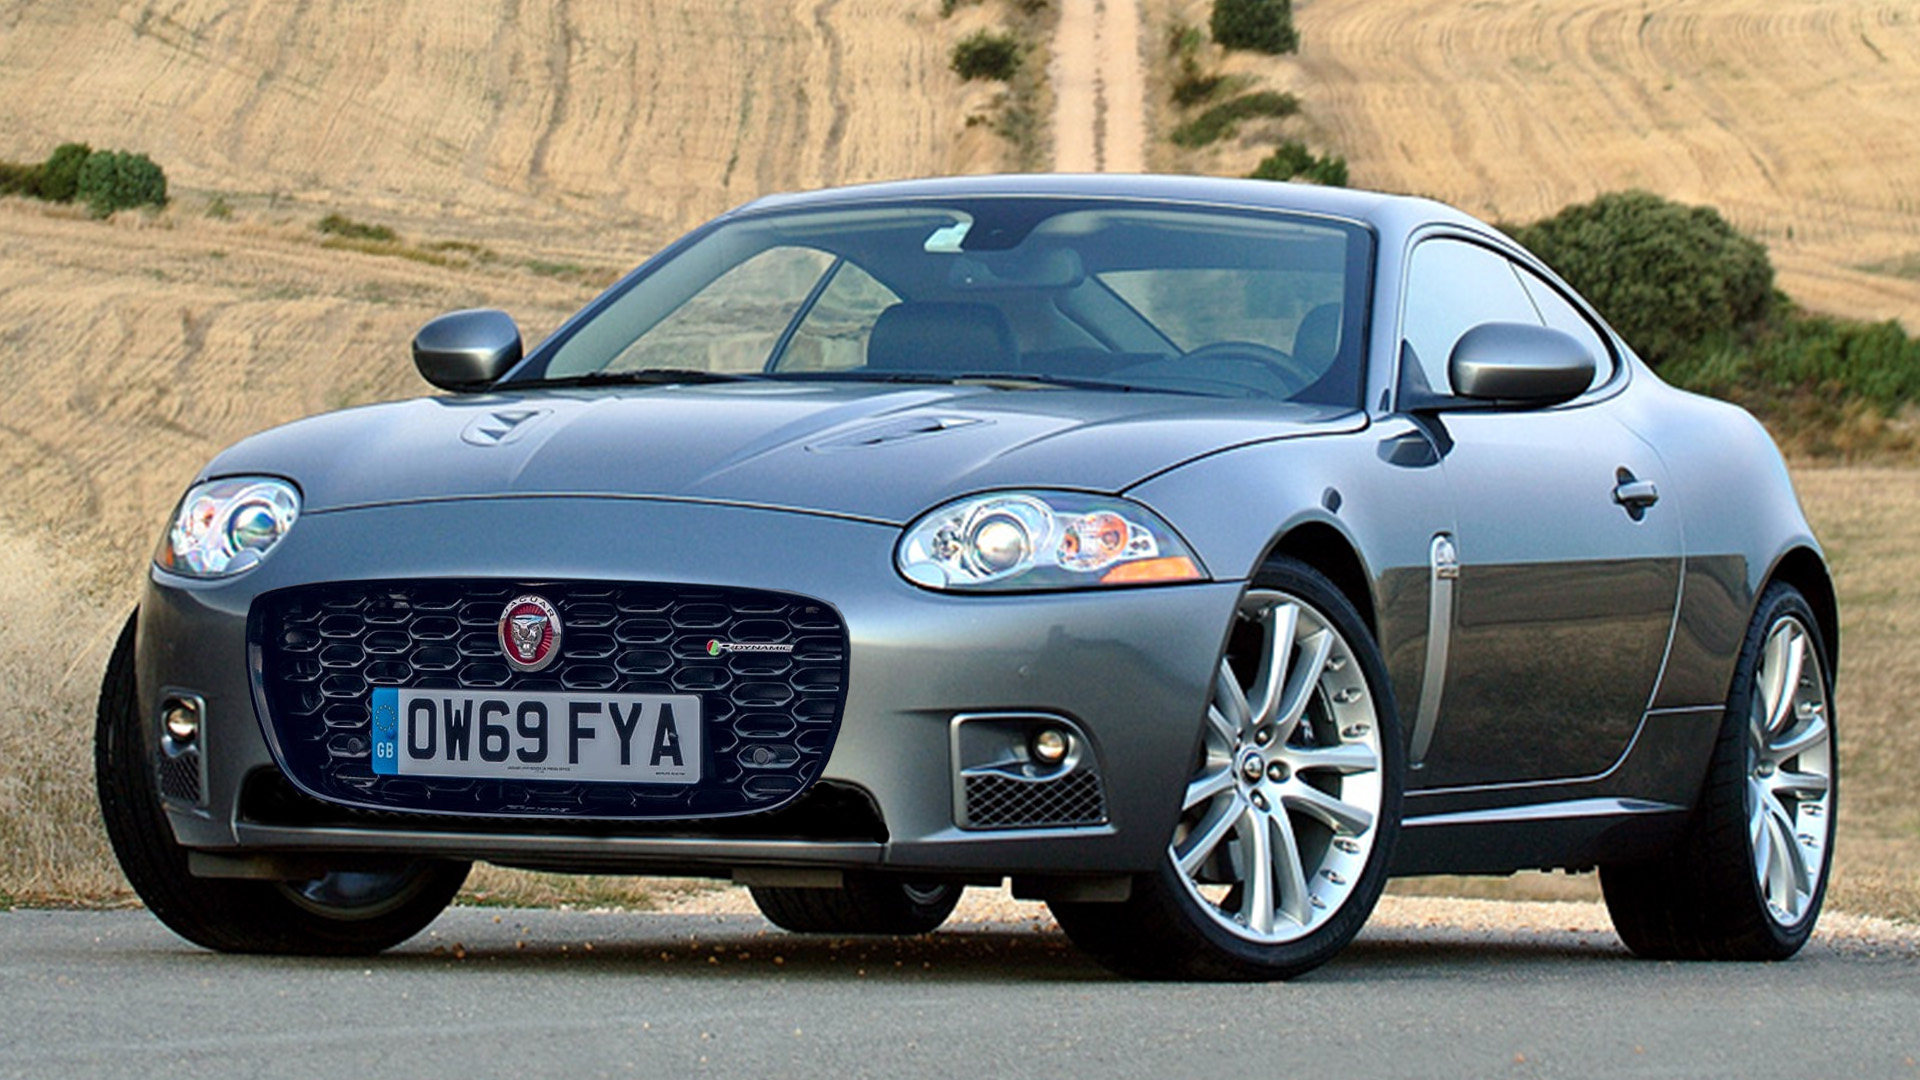 Our Imaginary Bumper-Swapped Jag XKR Is A Bargain Nissan Z Alternative |  Carscoops